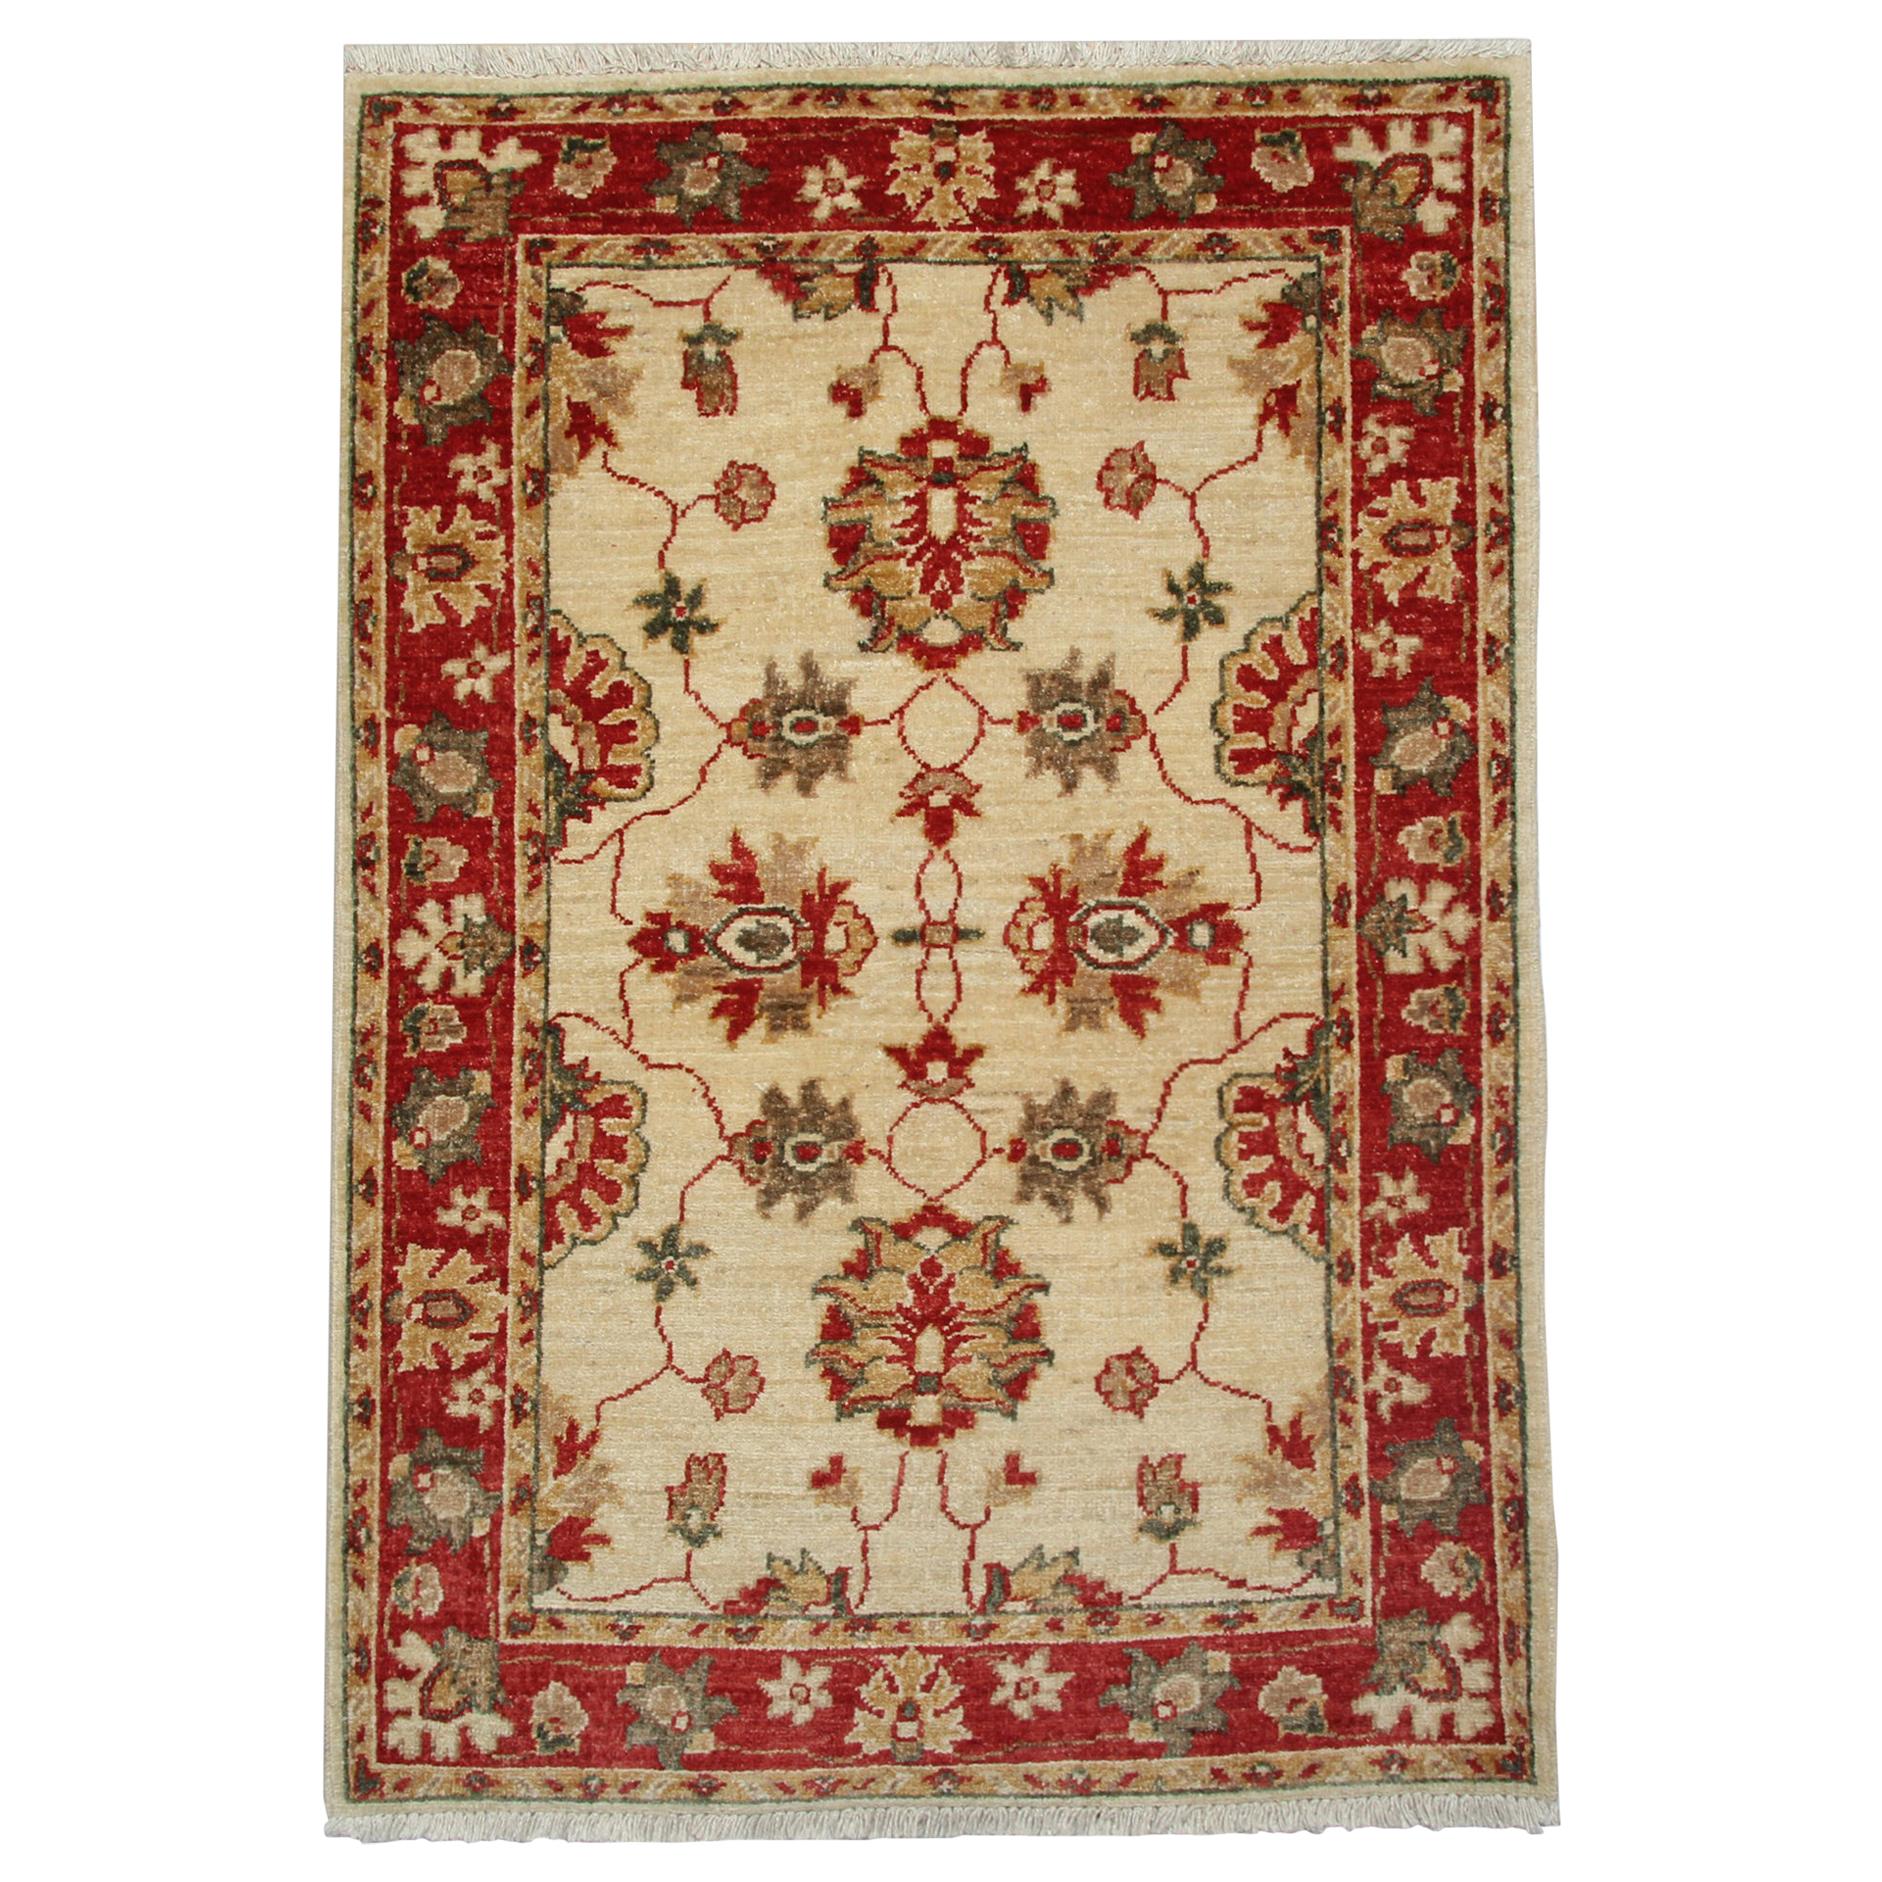 Handmade Floral Rug, Small Beige Carpet Oriental Wool Rugs for Sale For Sale